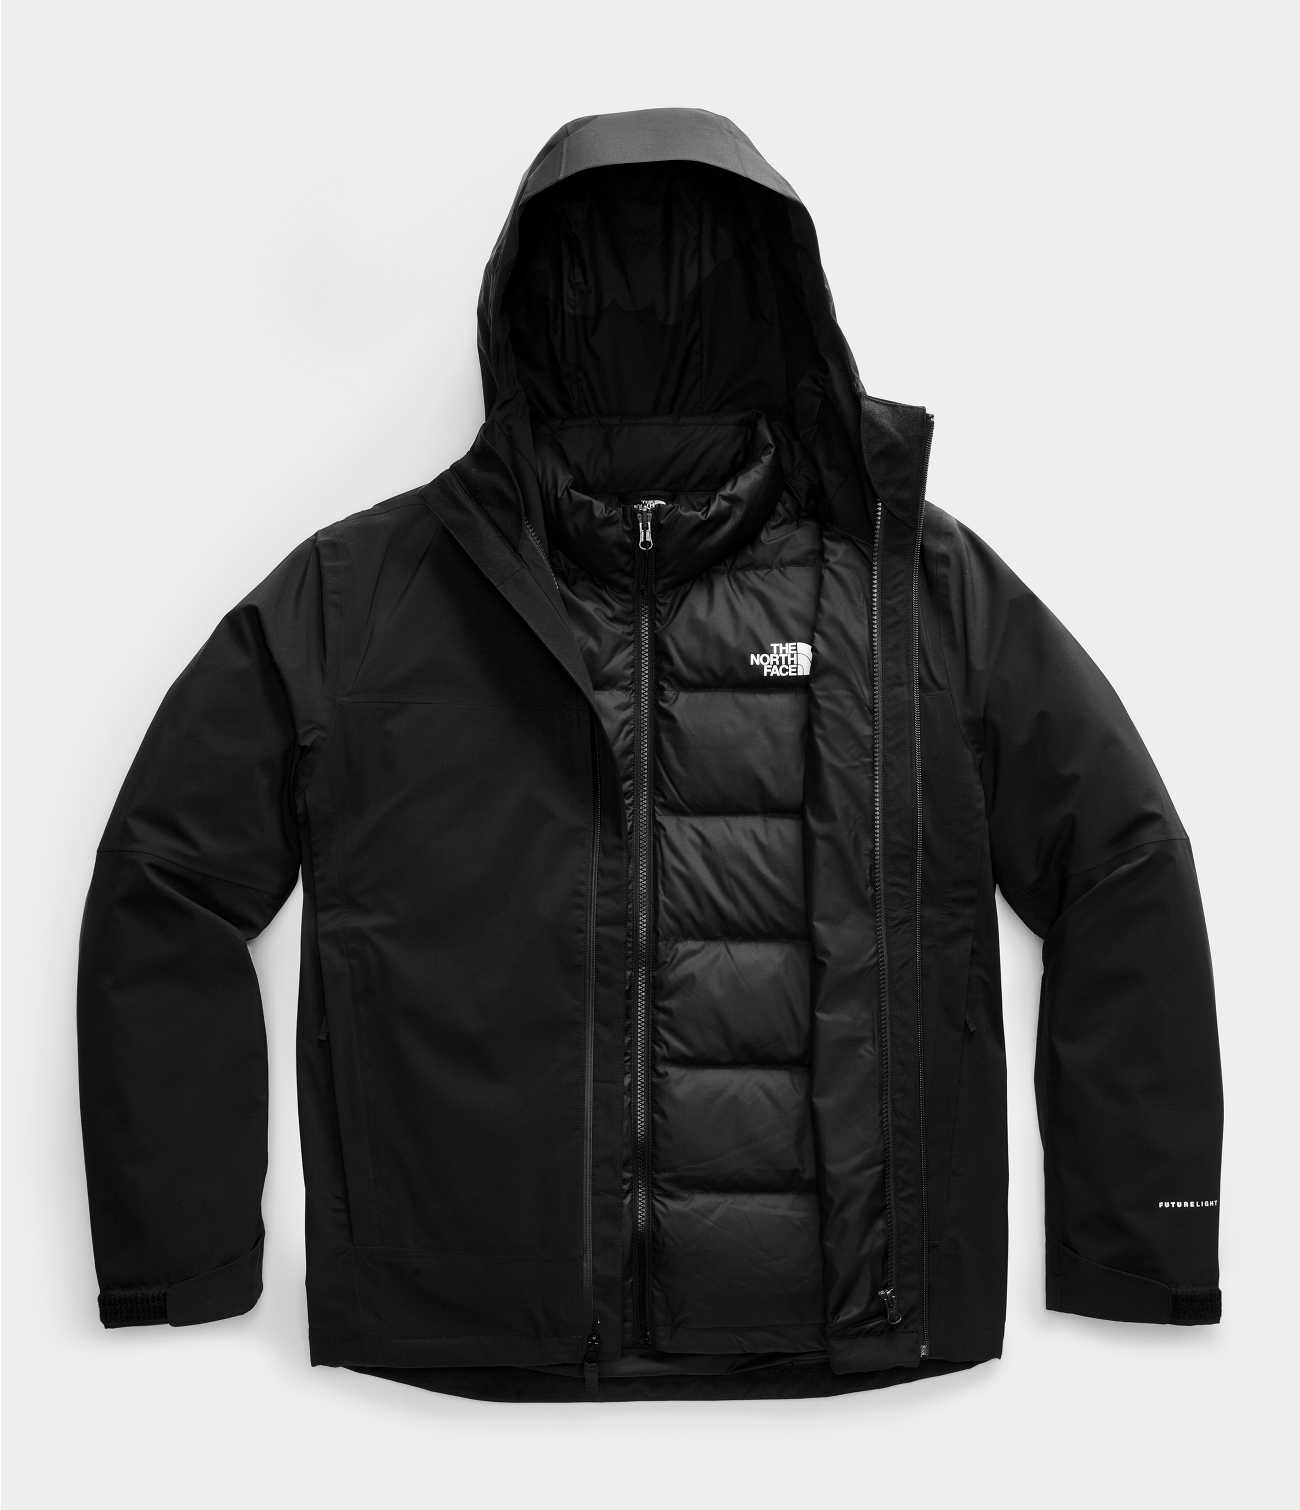 【L】THE NORTH FACE Mountain Light Jacket